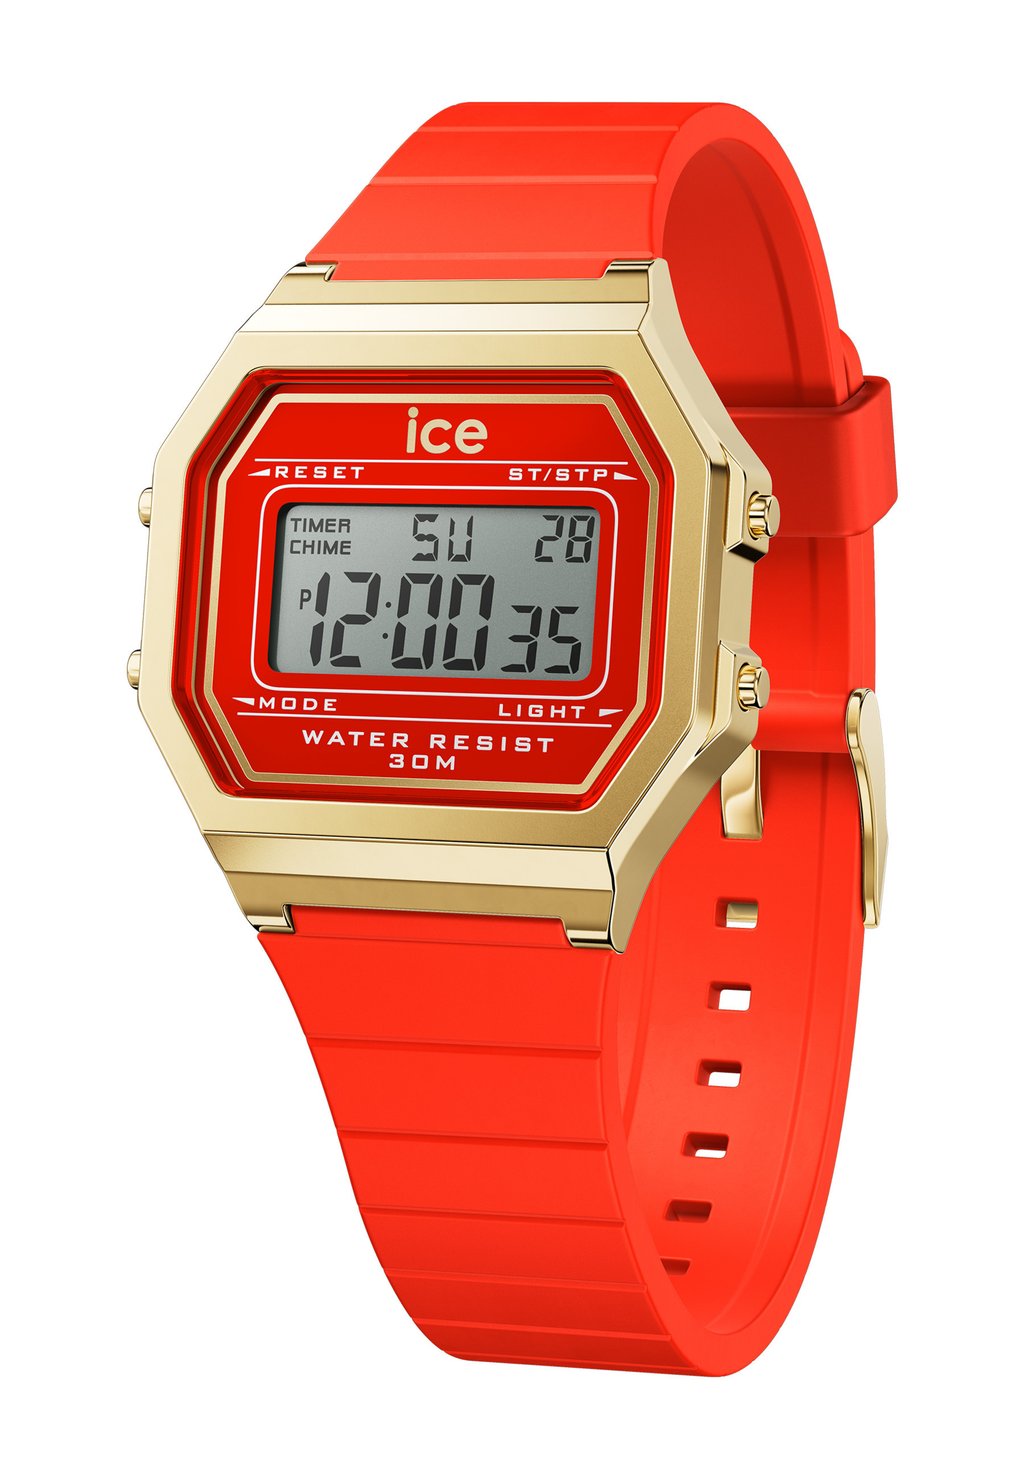 автокресло chicco seat up 012 red passion 07079828640000 Цифровые часы DIGIT RETRO Ice-Watch, цвет red passion s